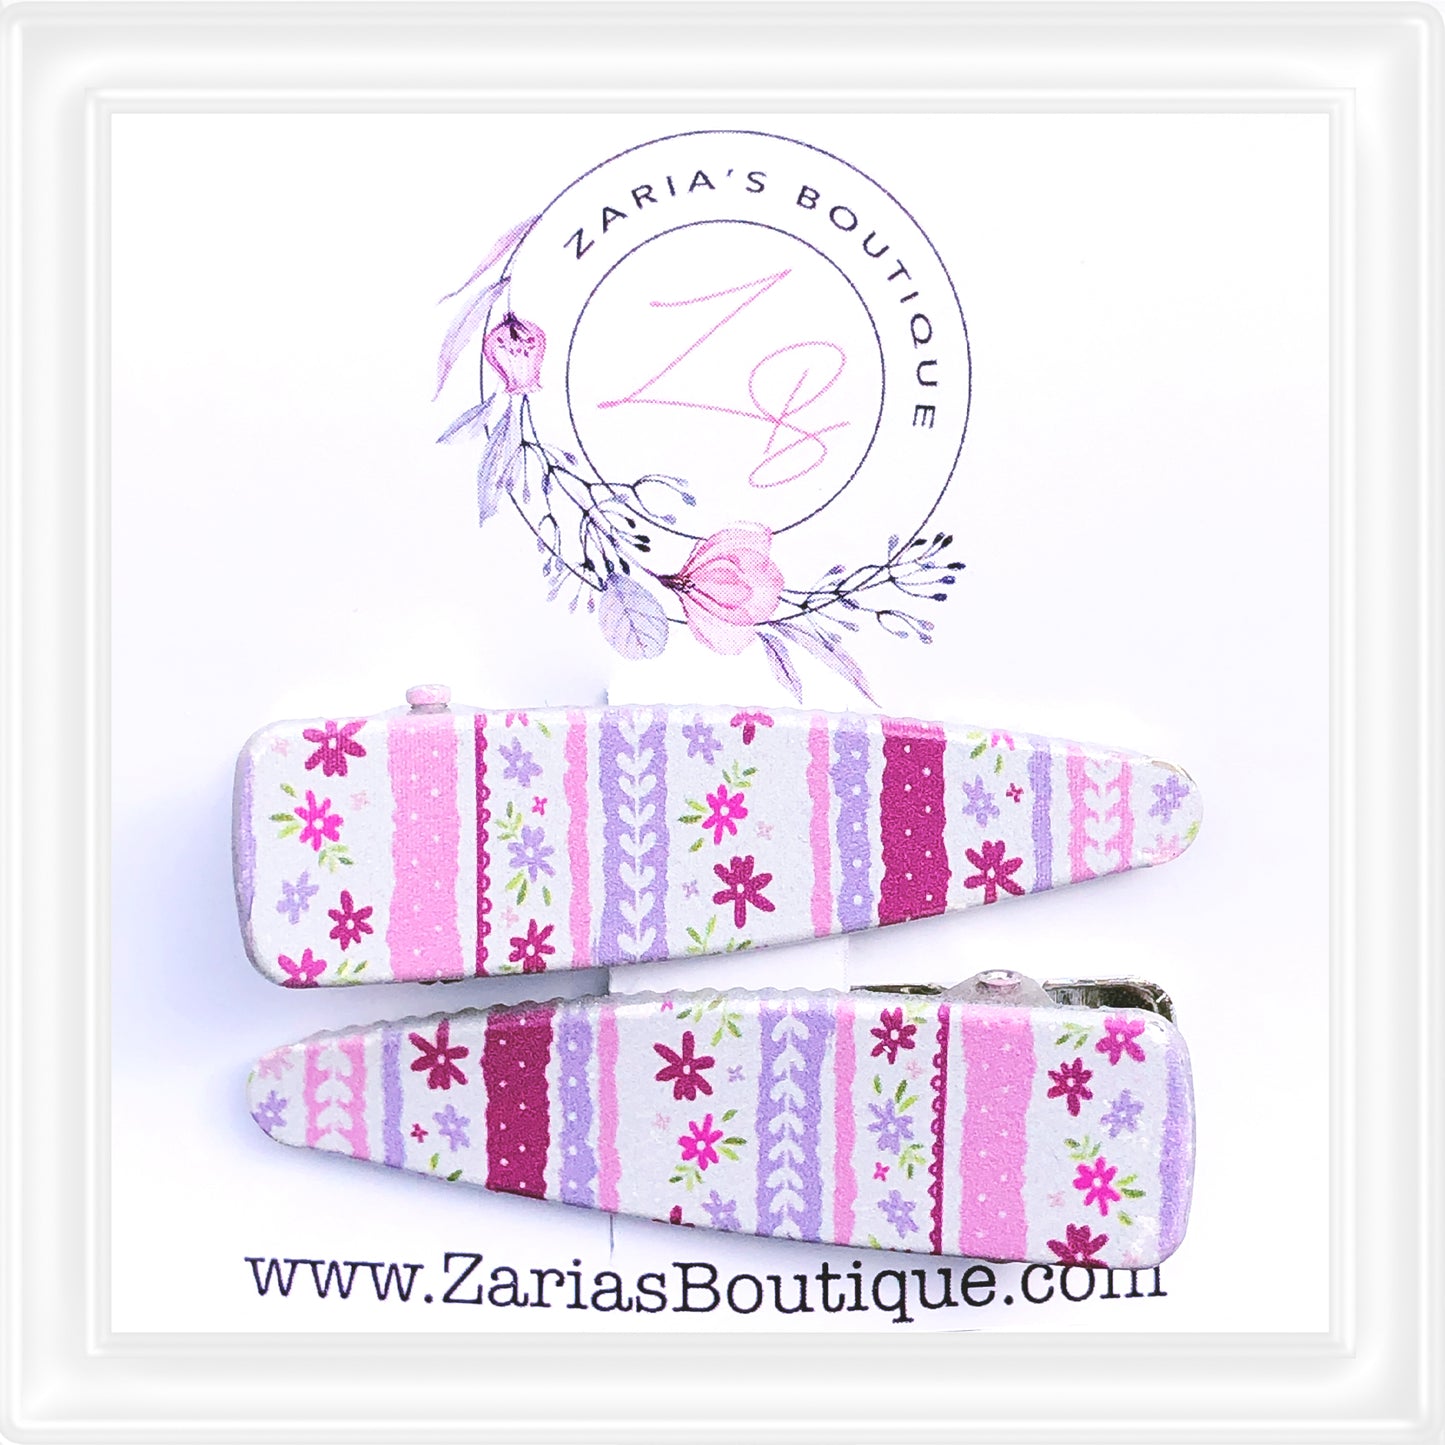 ⋅ EXCLUSIVE ⋅ Striped Floral Pink ⋅ Silver ⋅ Premium Hair Clips ⋅